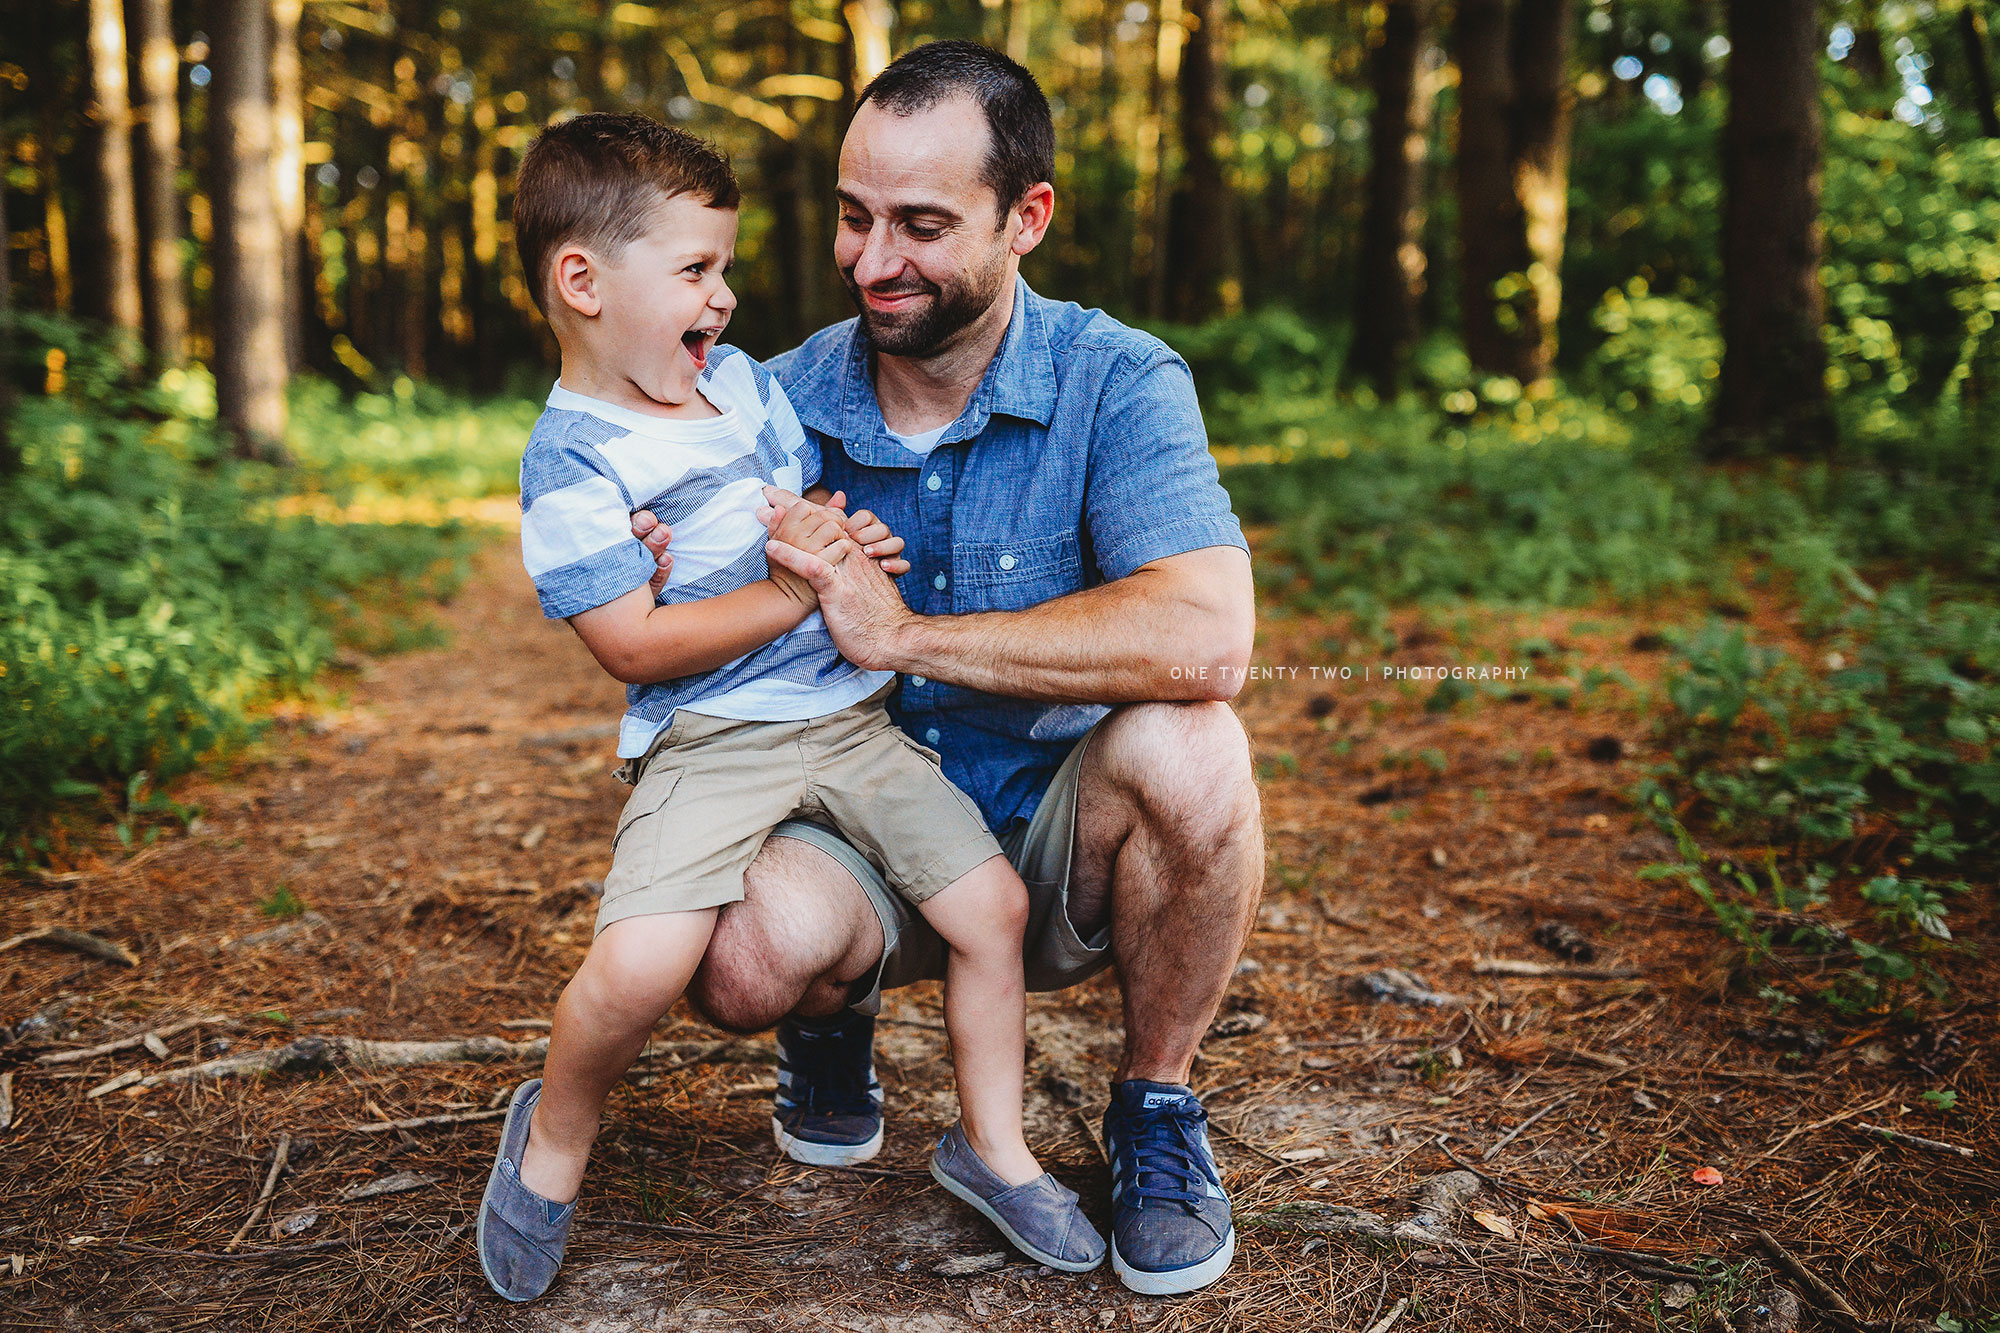 st-louis-father-and-son-portrait-in-woods-one-twenty-two-photography.jpg